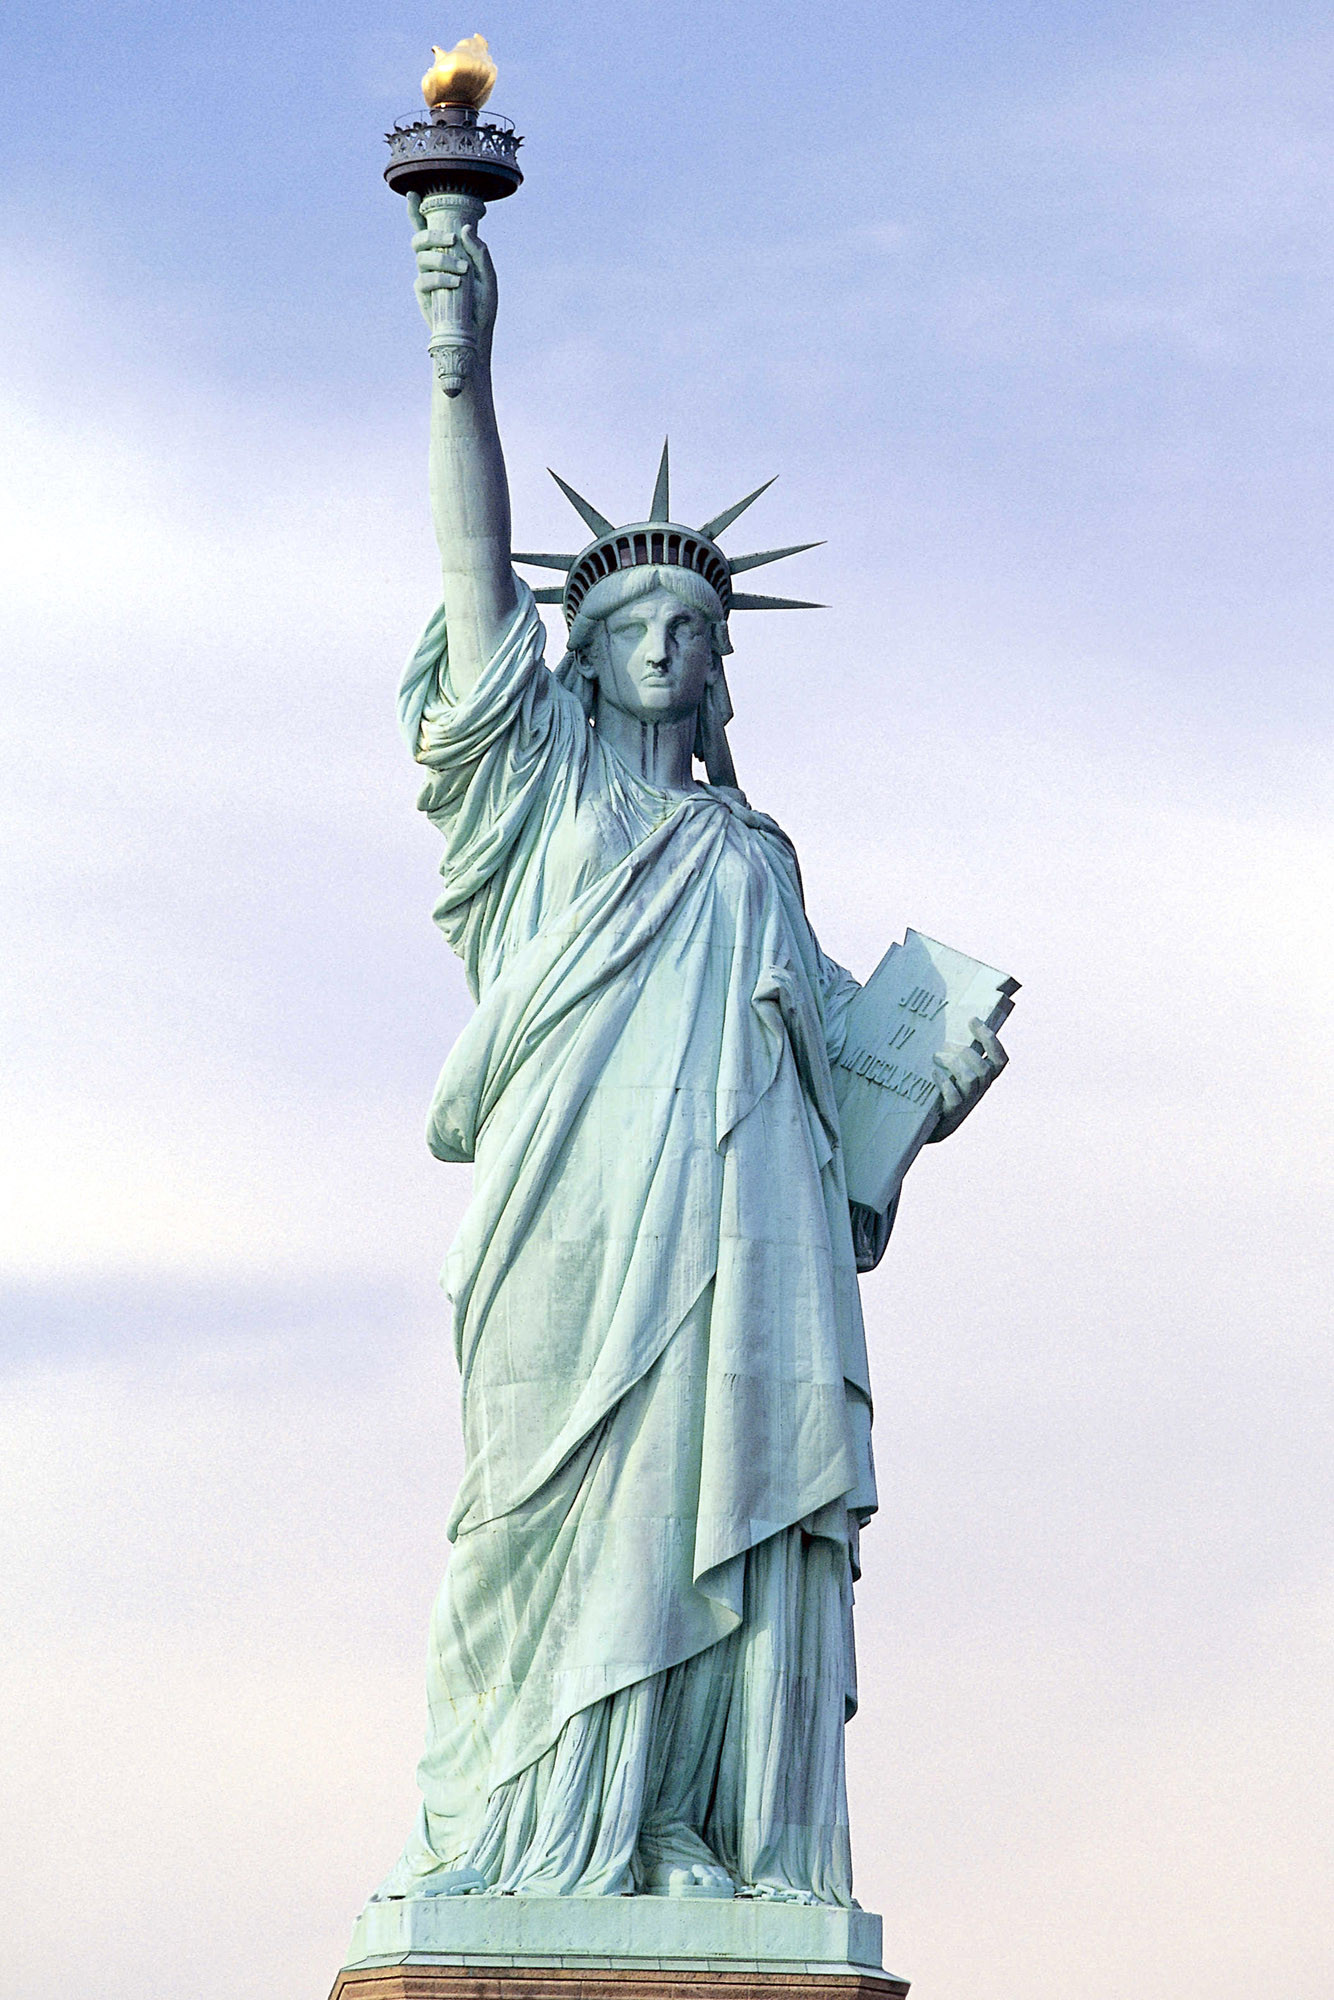 Statue of Liberty Backgrounds, Top Statue of Liberty, #14529